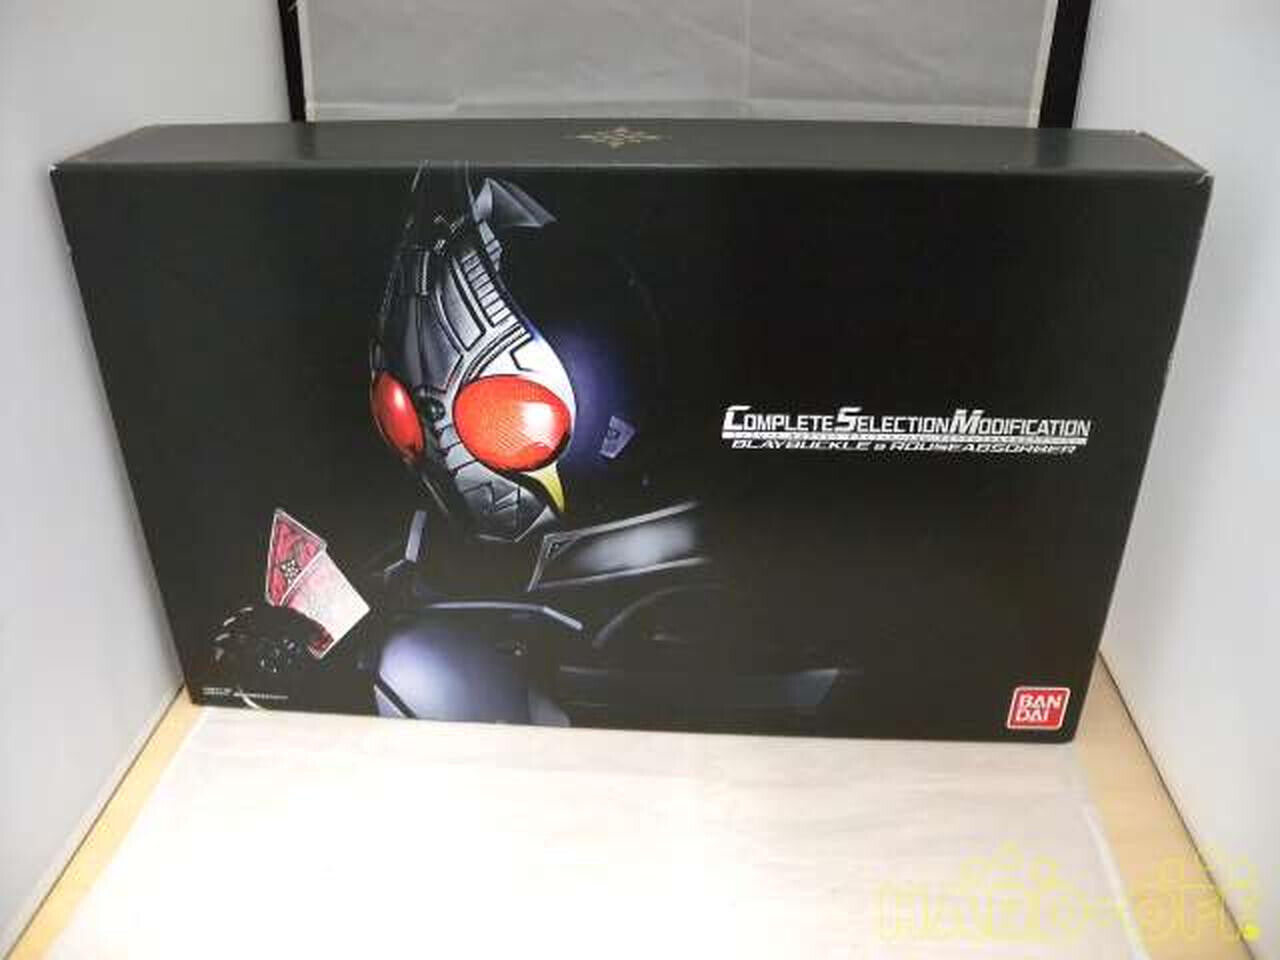 Bandai Kamen Rider Blade CSM Bray Buckle & Rouse Absorber Action Toy